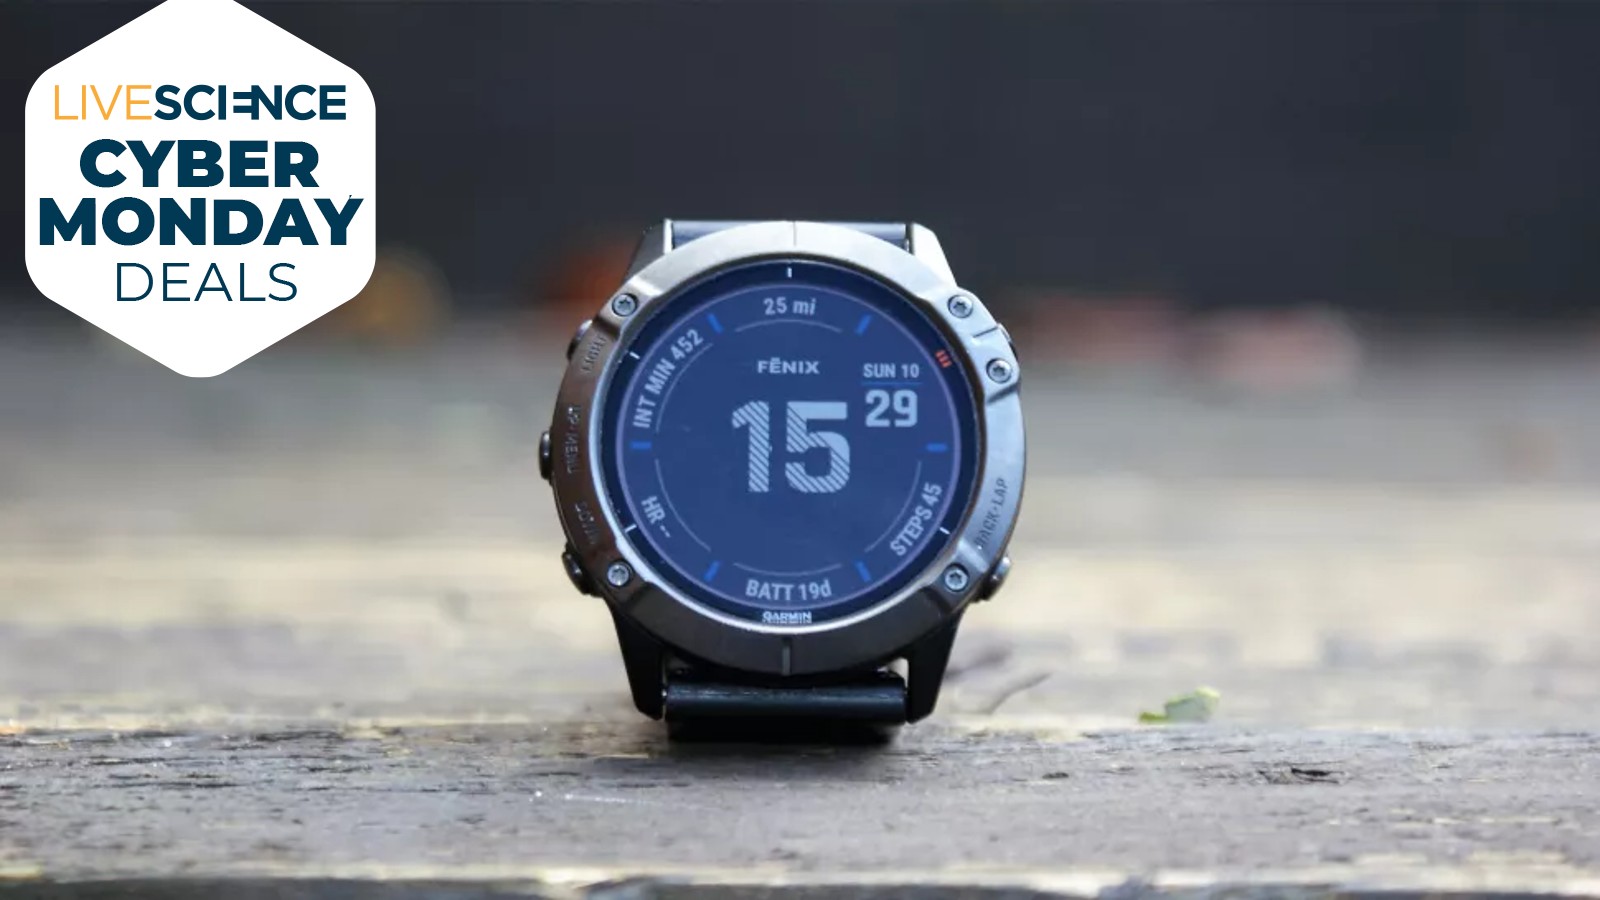 Cyber Monday is your last chance to get 41% off the Garmin Fenix 6X Pro Solar